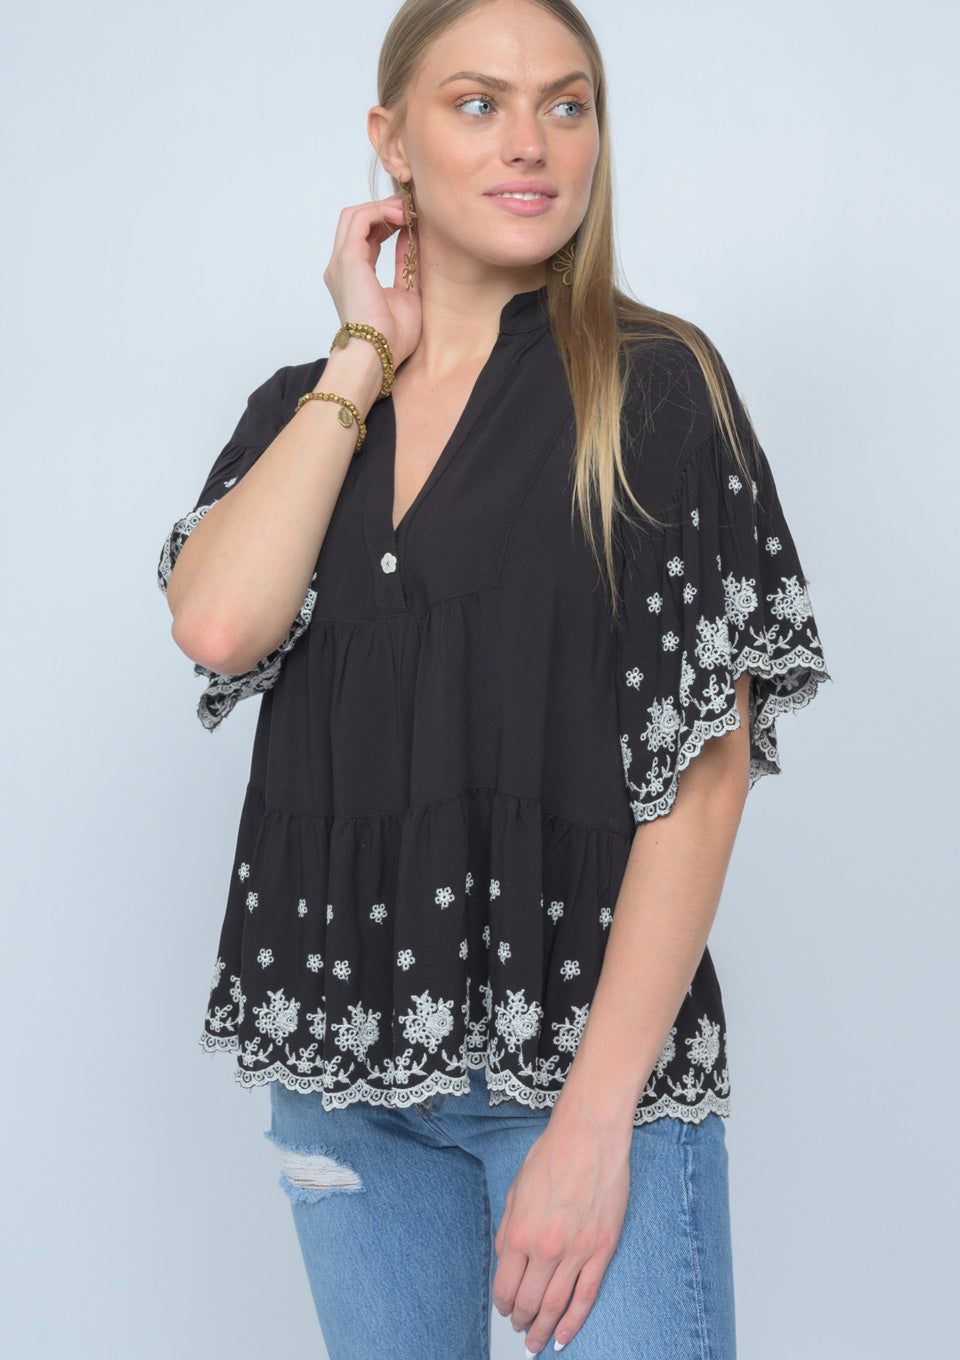 Load image into Gallery viewer, Black short bell sleeve top with white embroidery by ivy jane at 6Whiskey six whisky for women spring 2021
